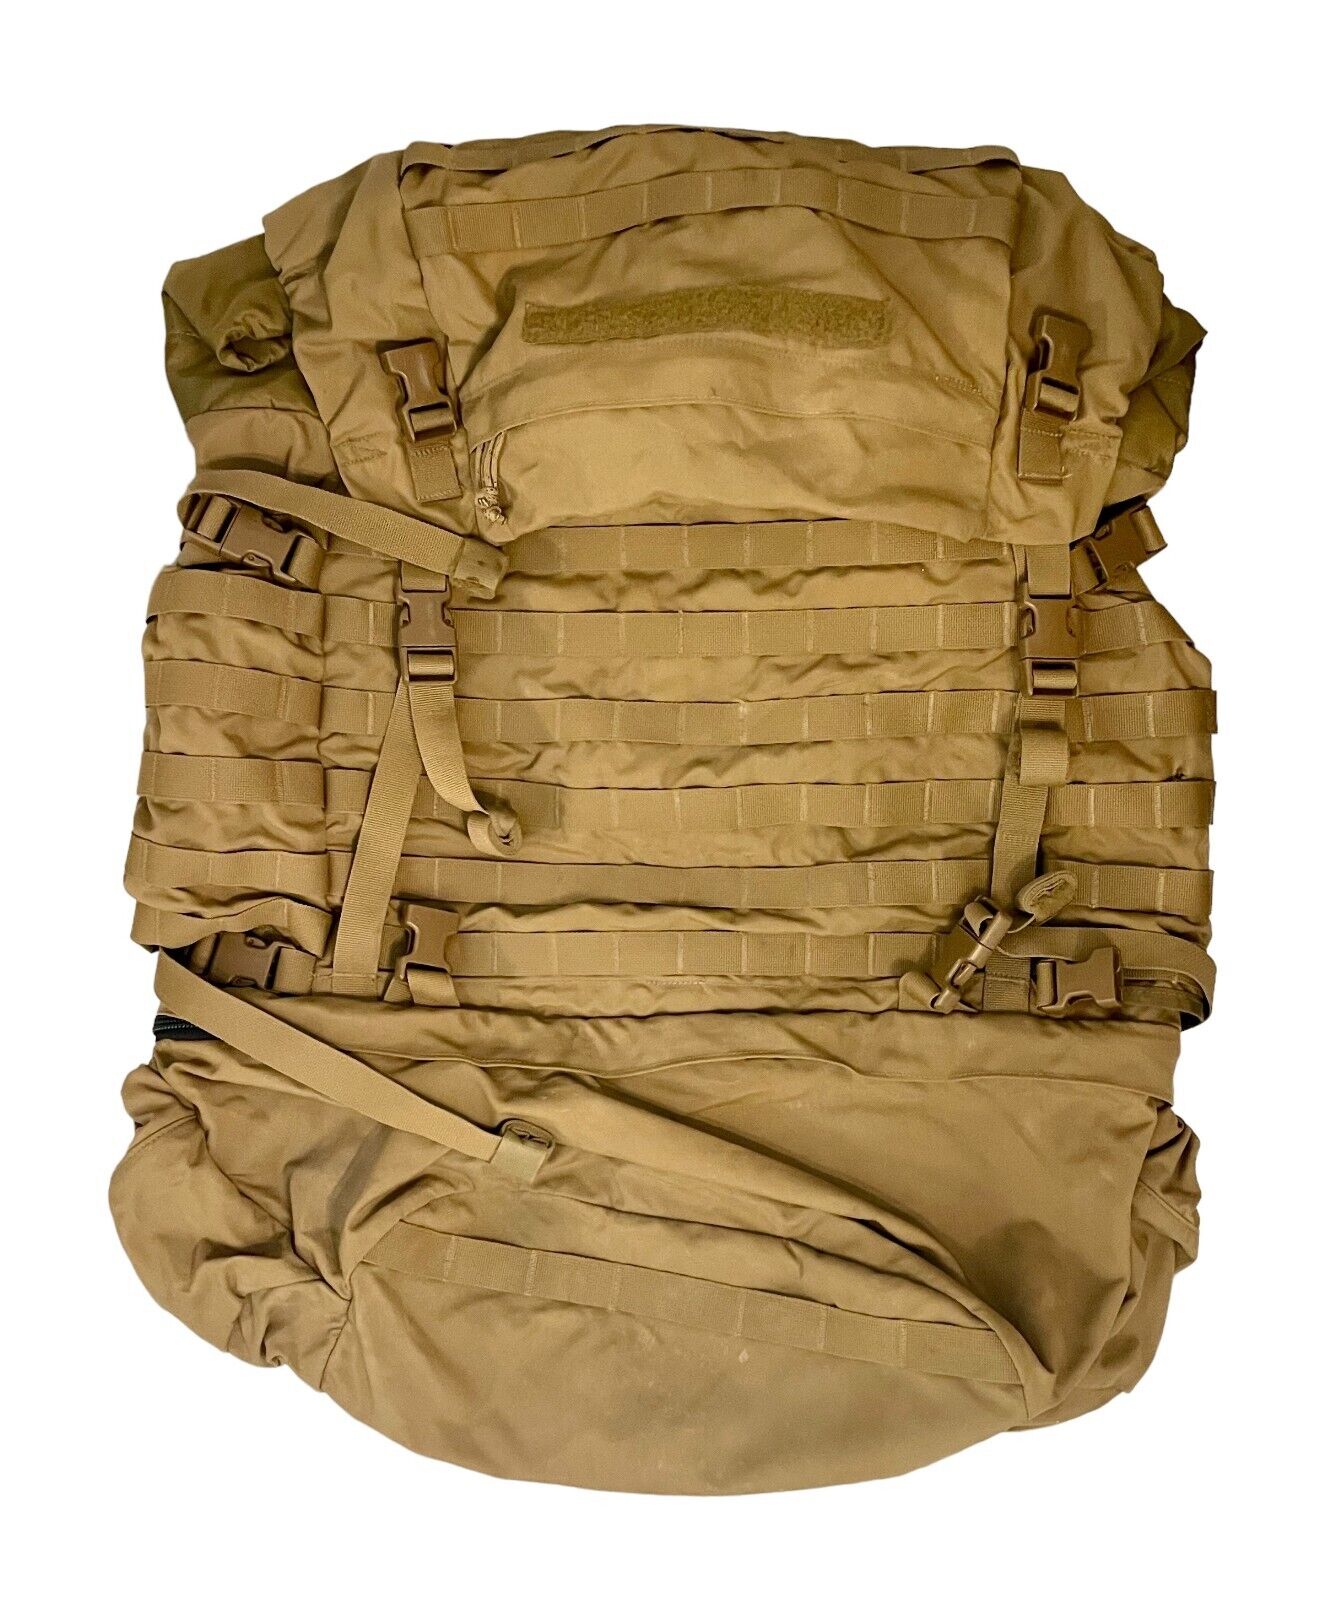 USMC Coyote FILBE System Large Rucksack Main Field Pack No Frame Molle